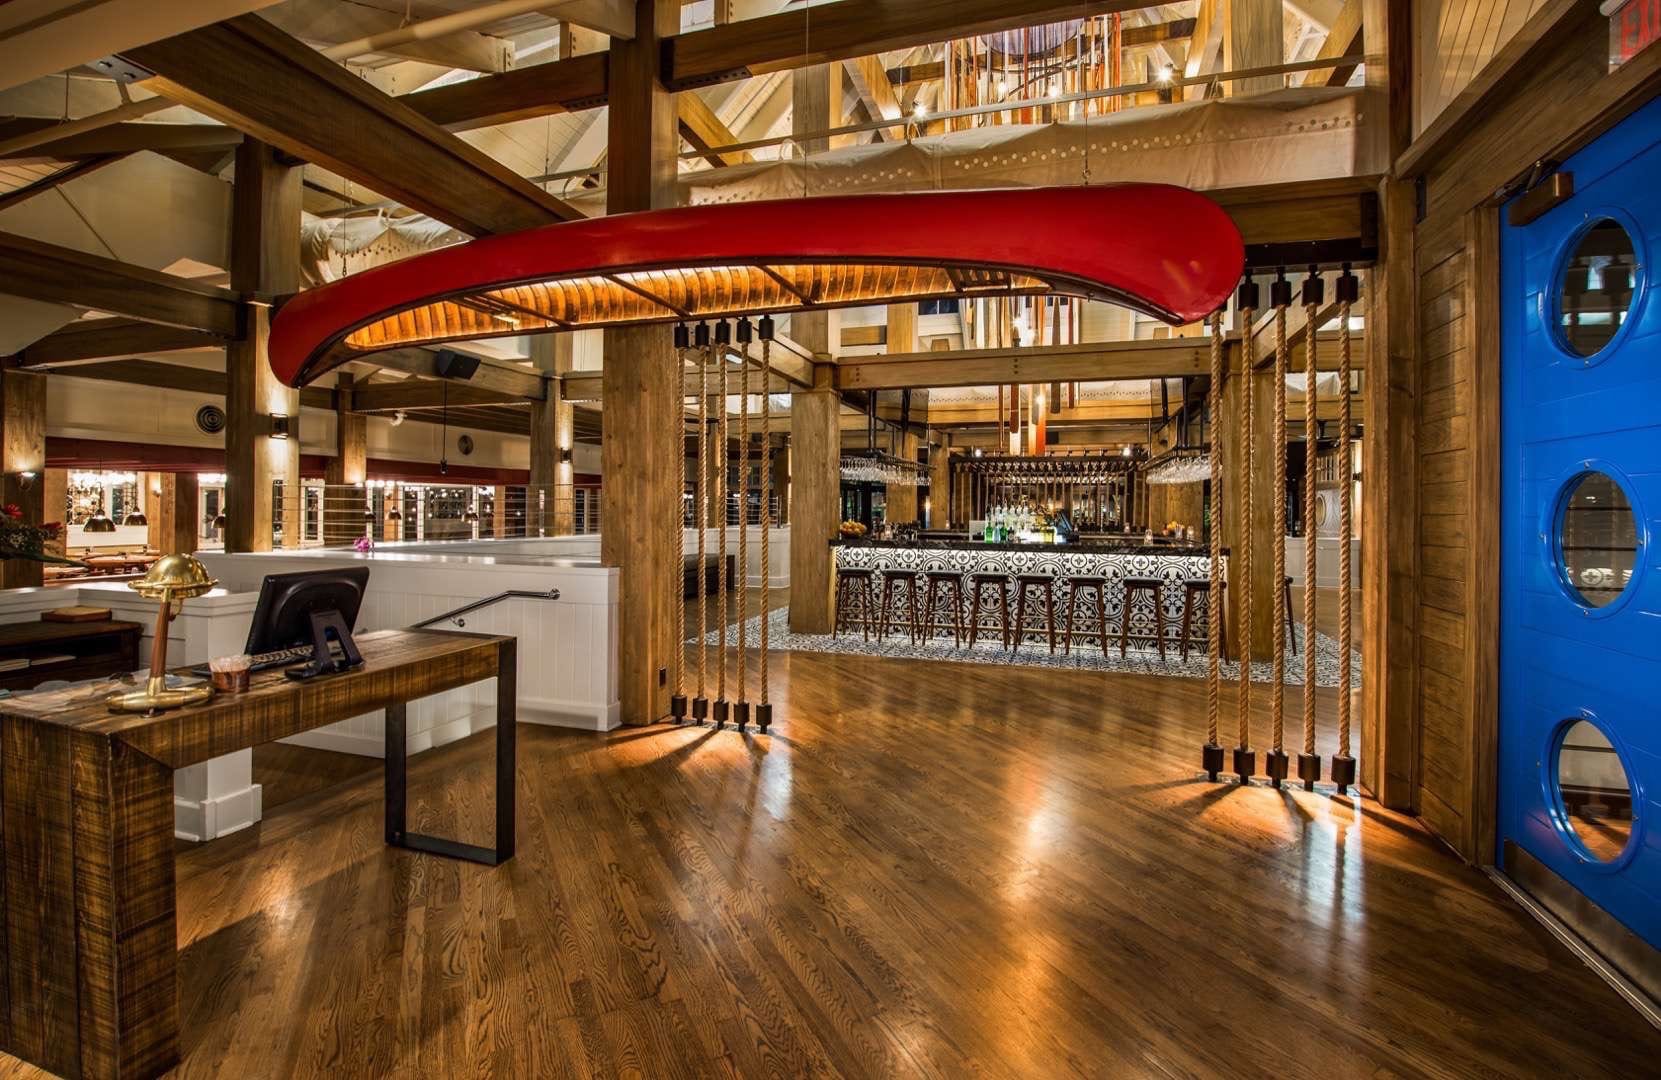 IU C&I Studios Portfolio The Restaurant People Inside view of the Boatyard restaurant with a canoe hanging from rafters as well as check in and out table and bar